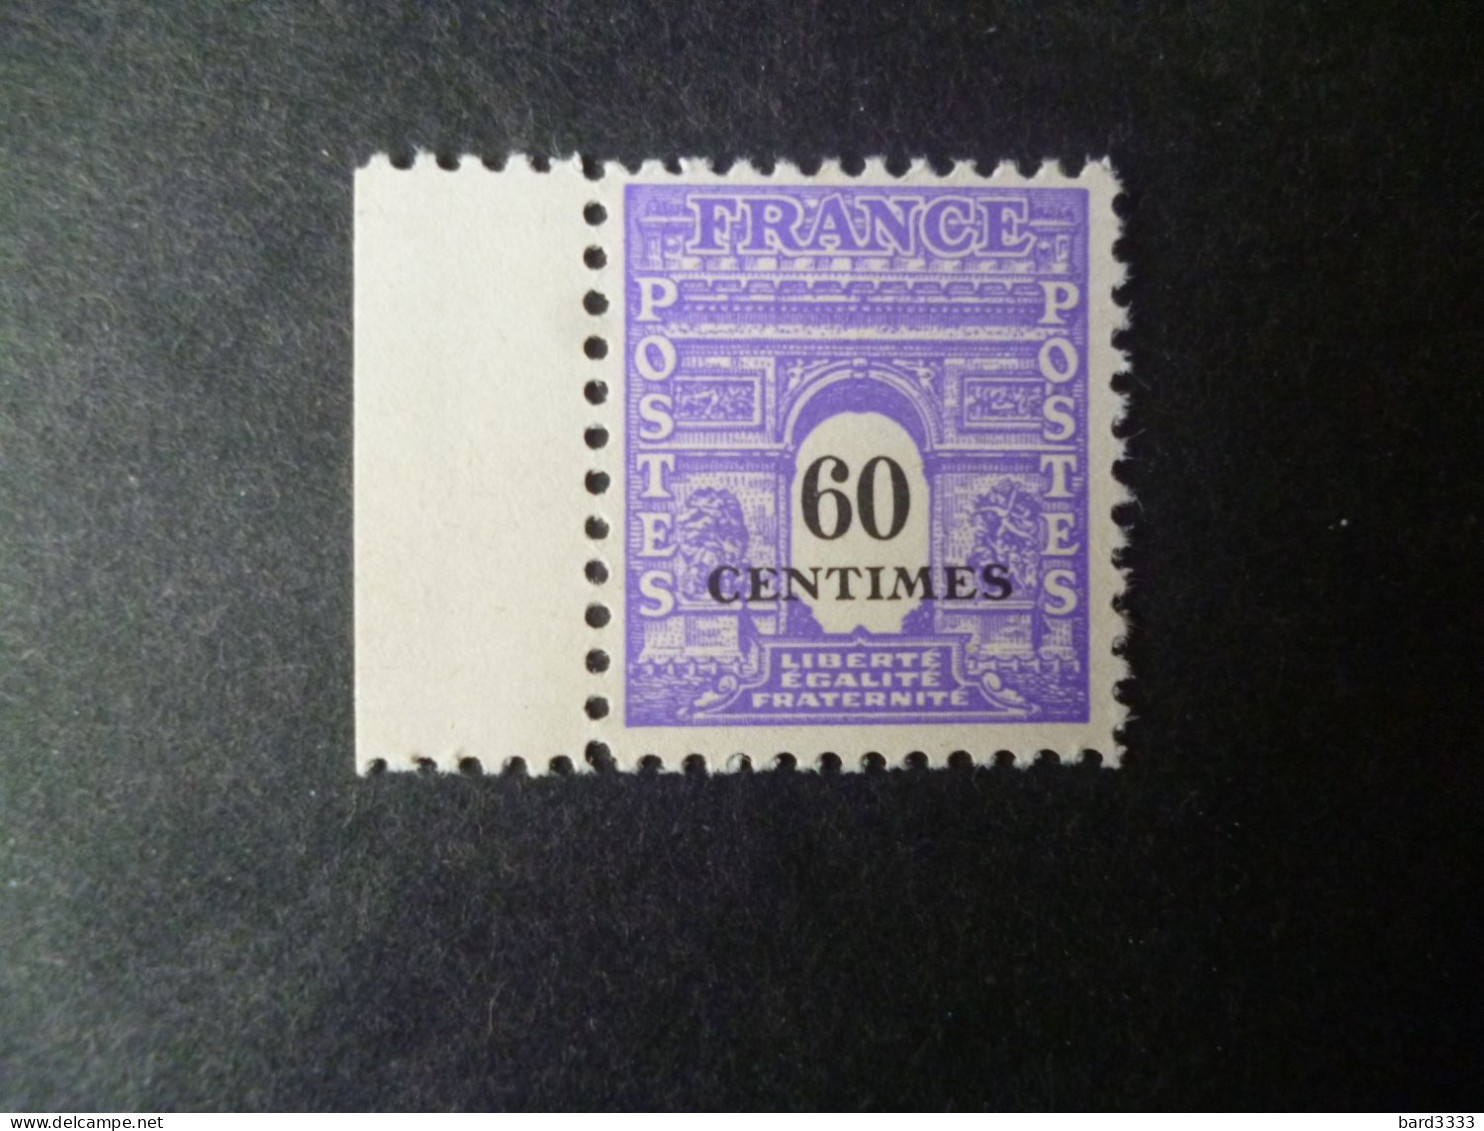 Timbre France Neuf ** 1945  N° 705 - 1944-45 Arco Del Triunfo